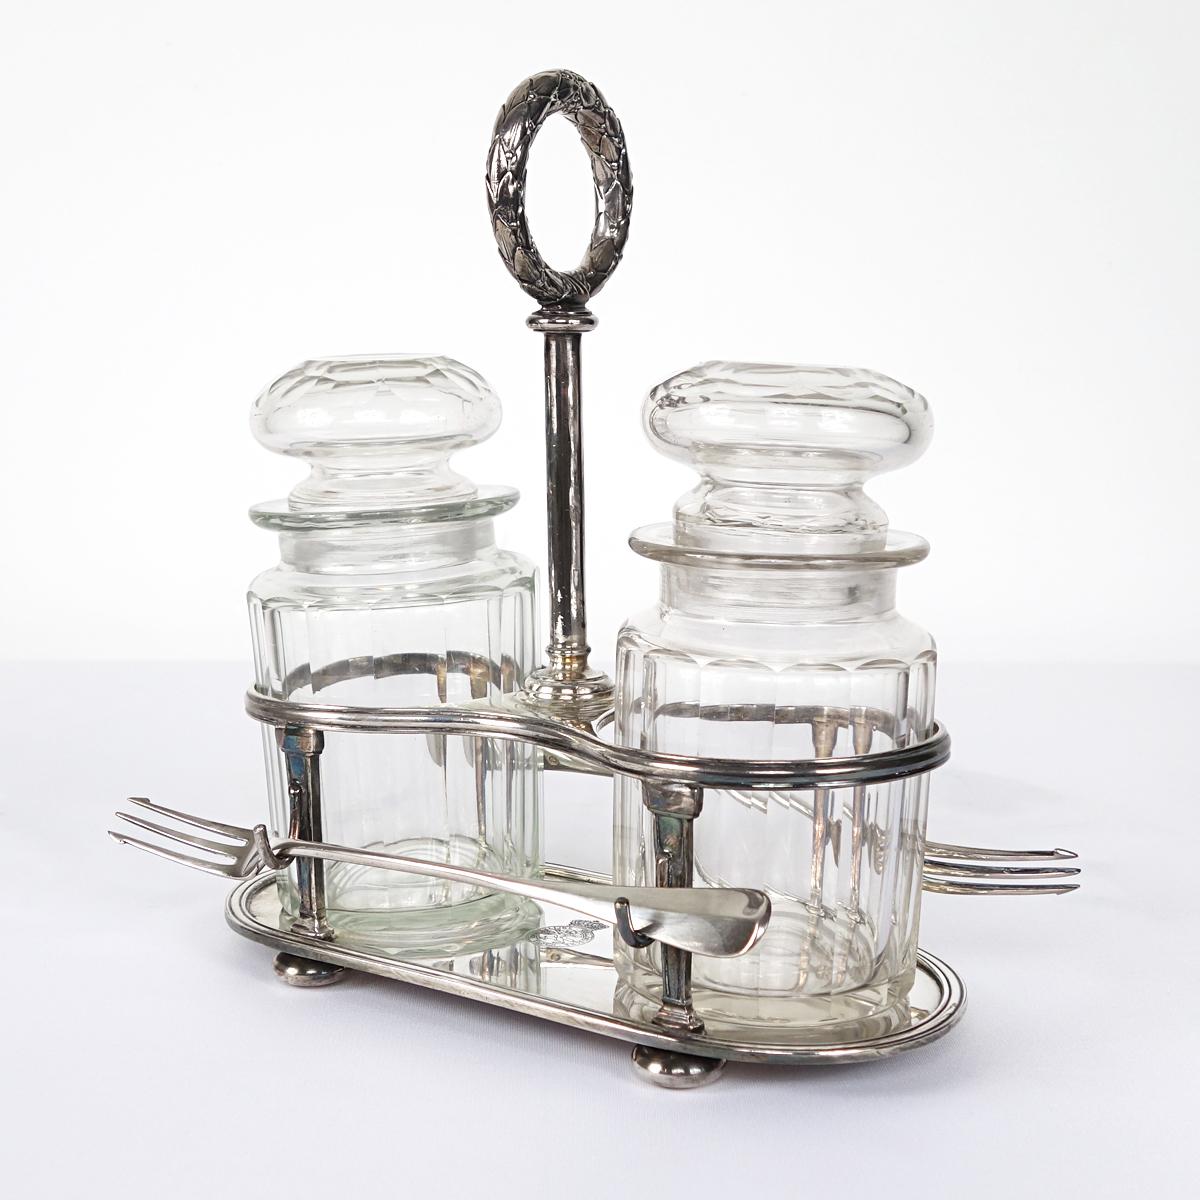 This pickle set consists of two glass jars, two small silver plate forks and a silver plate holder. It is signed 